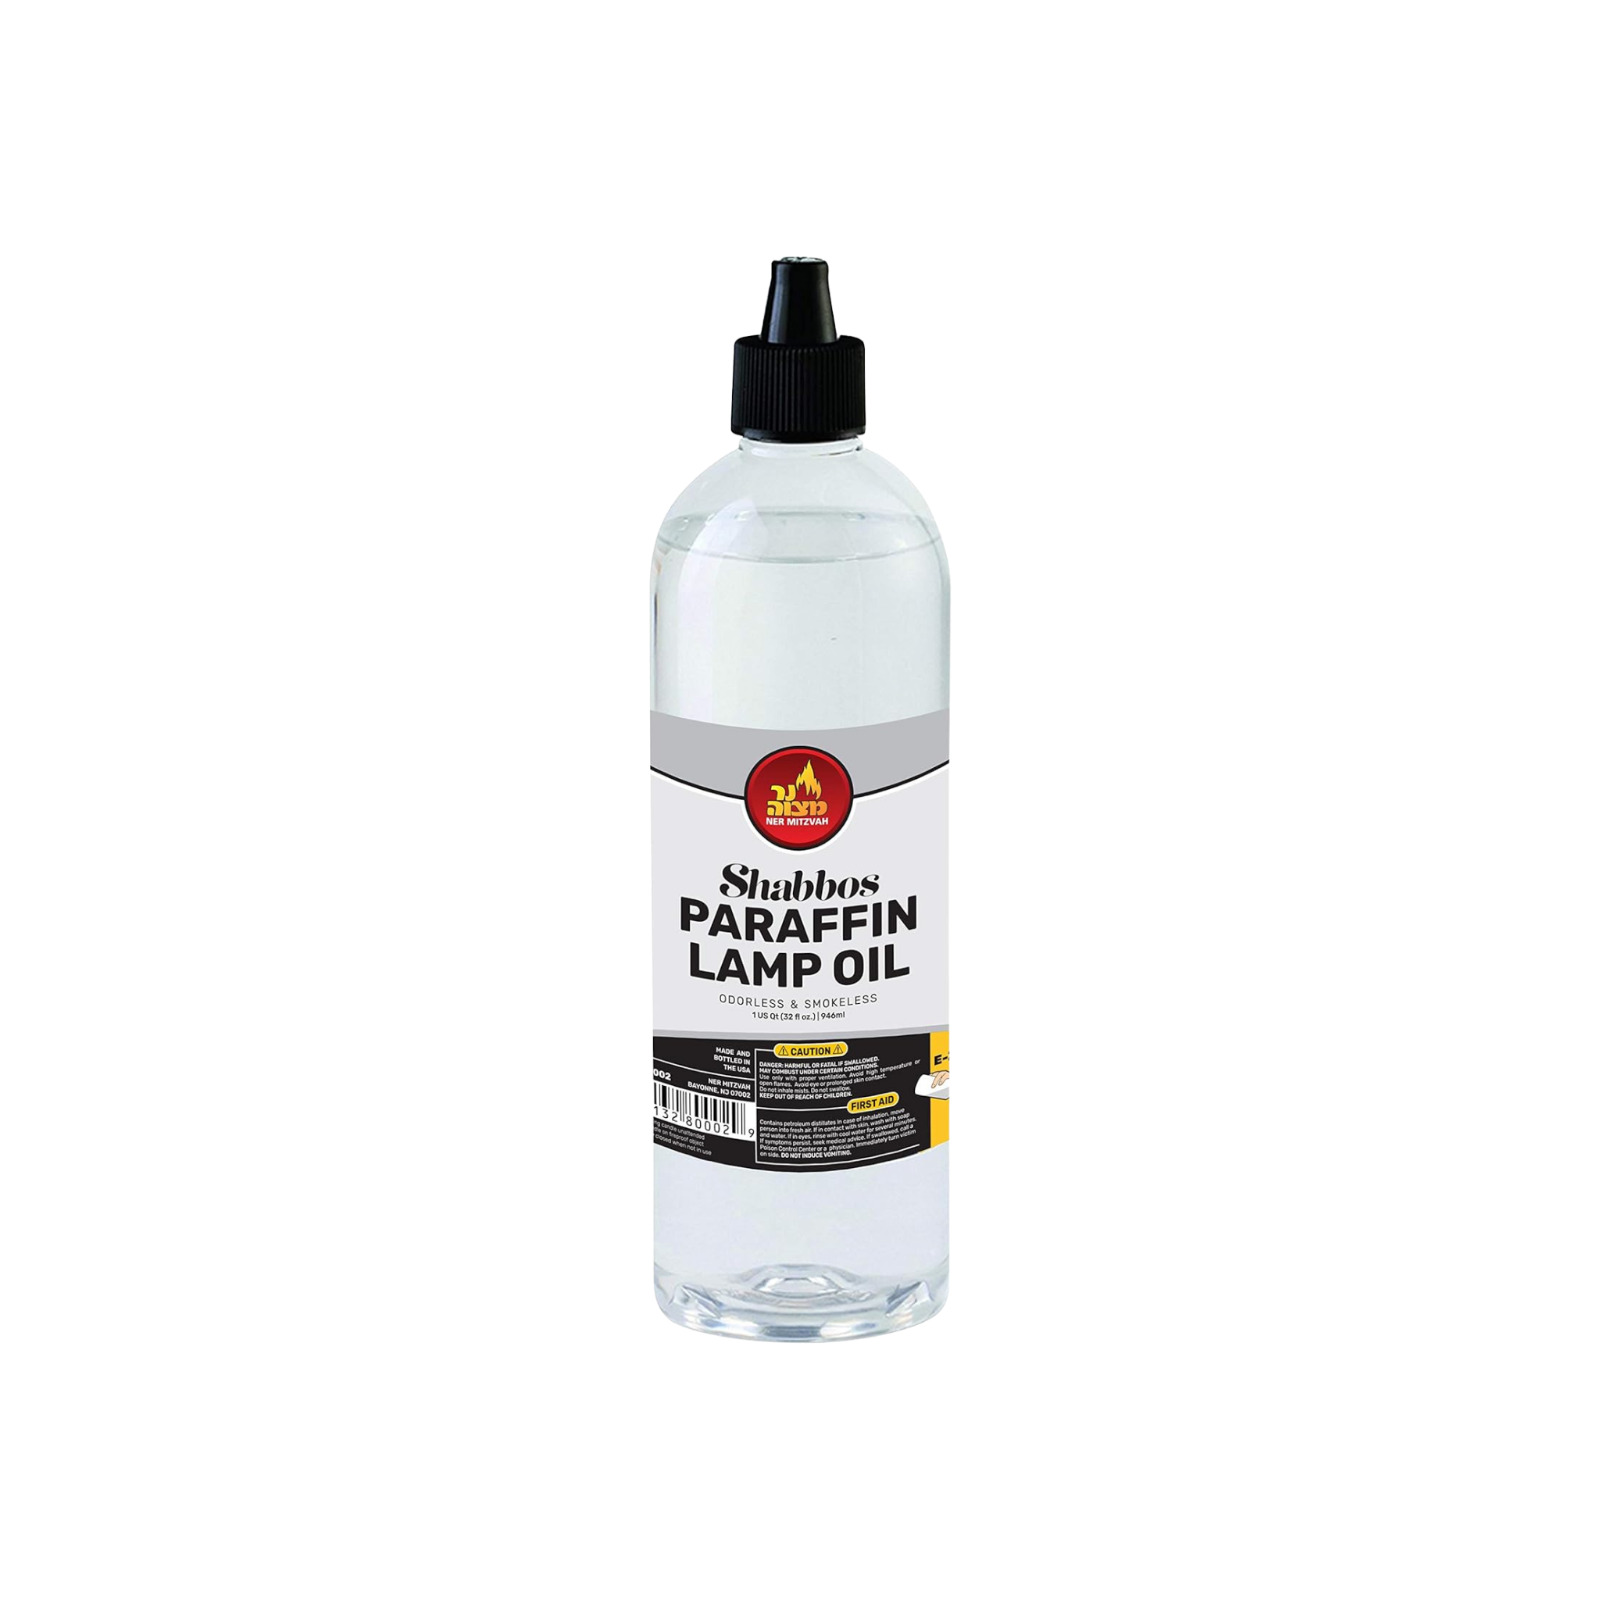 Shabbos Paraffin Lamp Oil - 32 fl oz | Clean-Burning, Smokeless, and Odor-Free